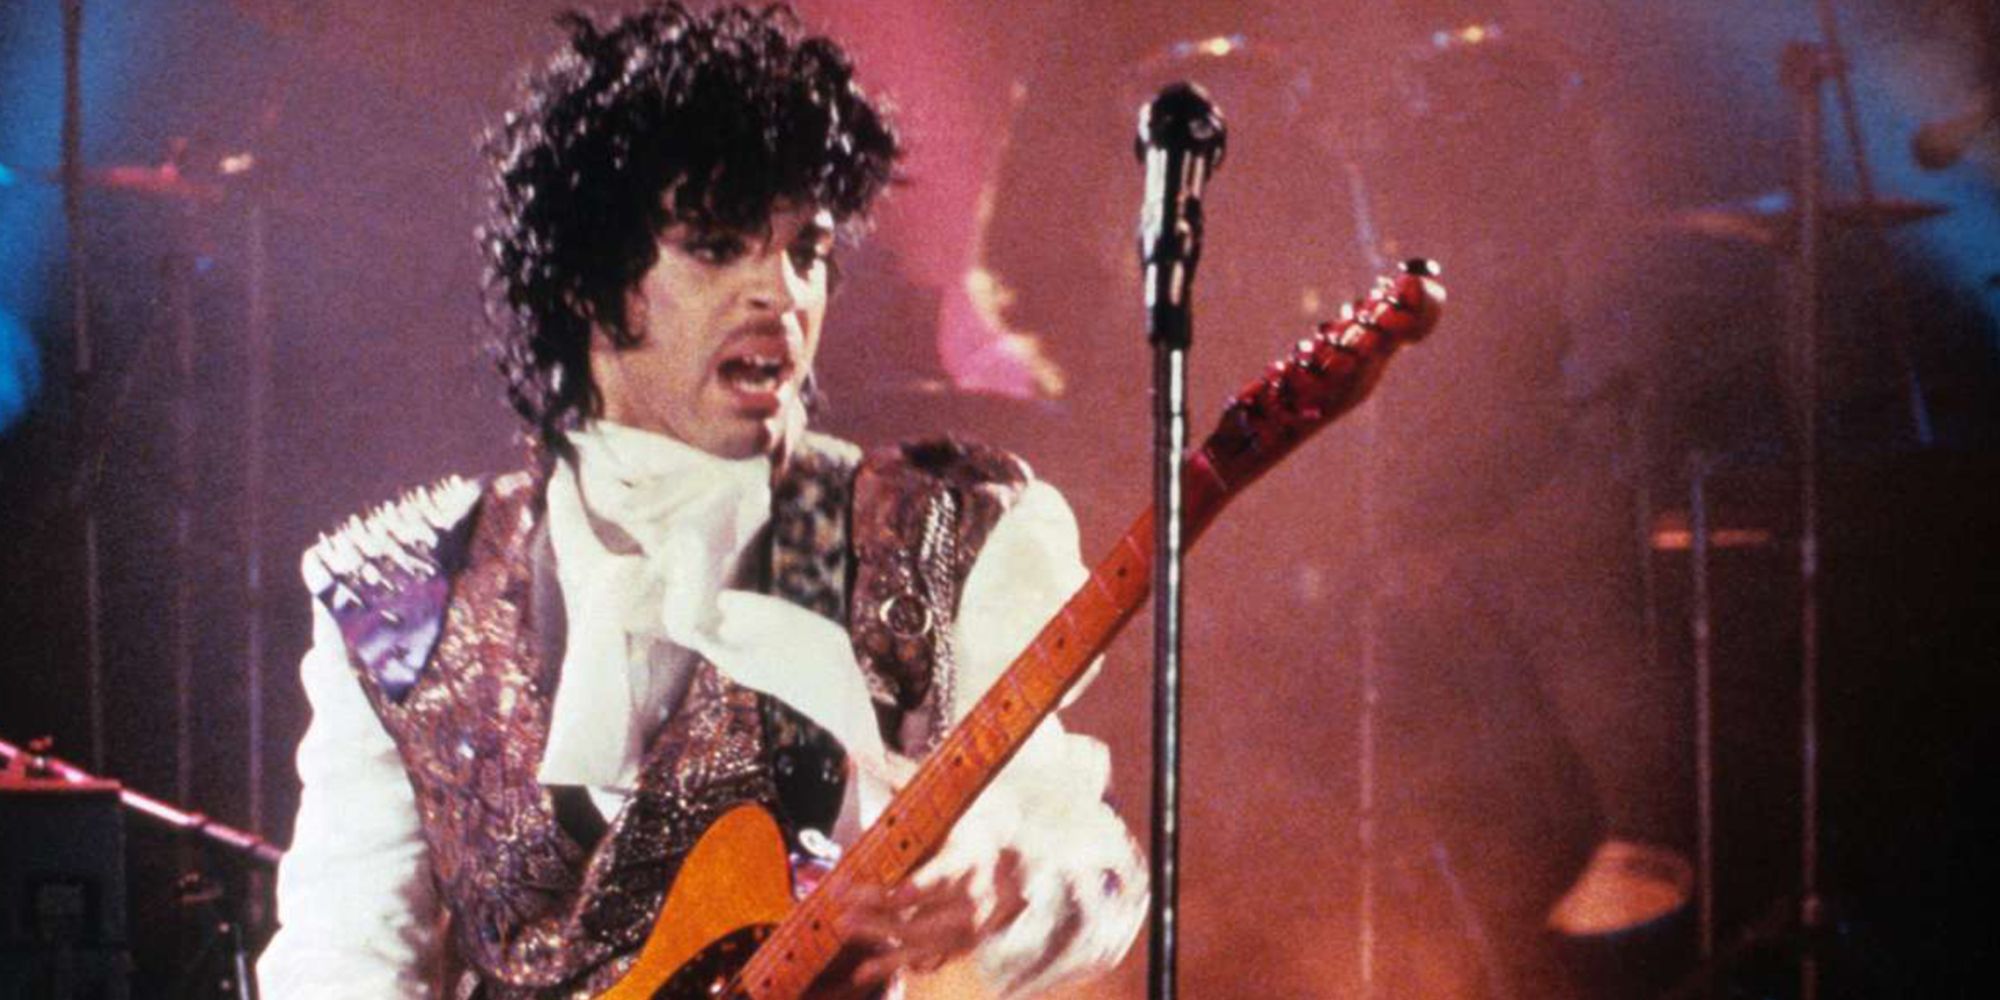 Prince playing a guitar onstage